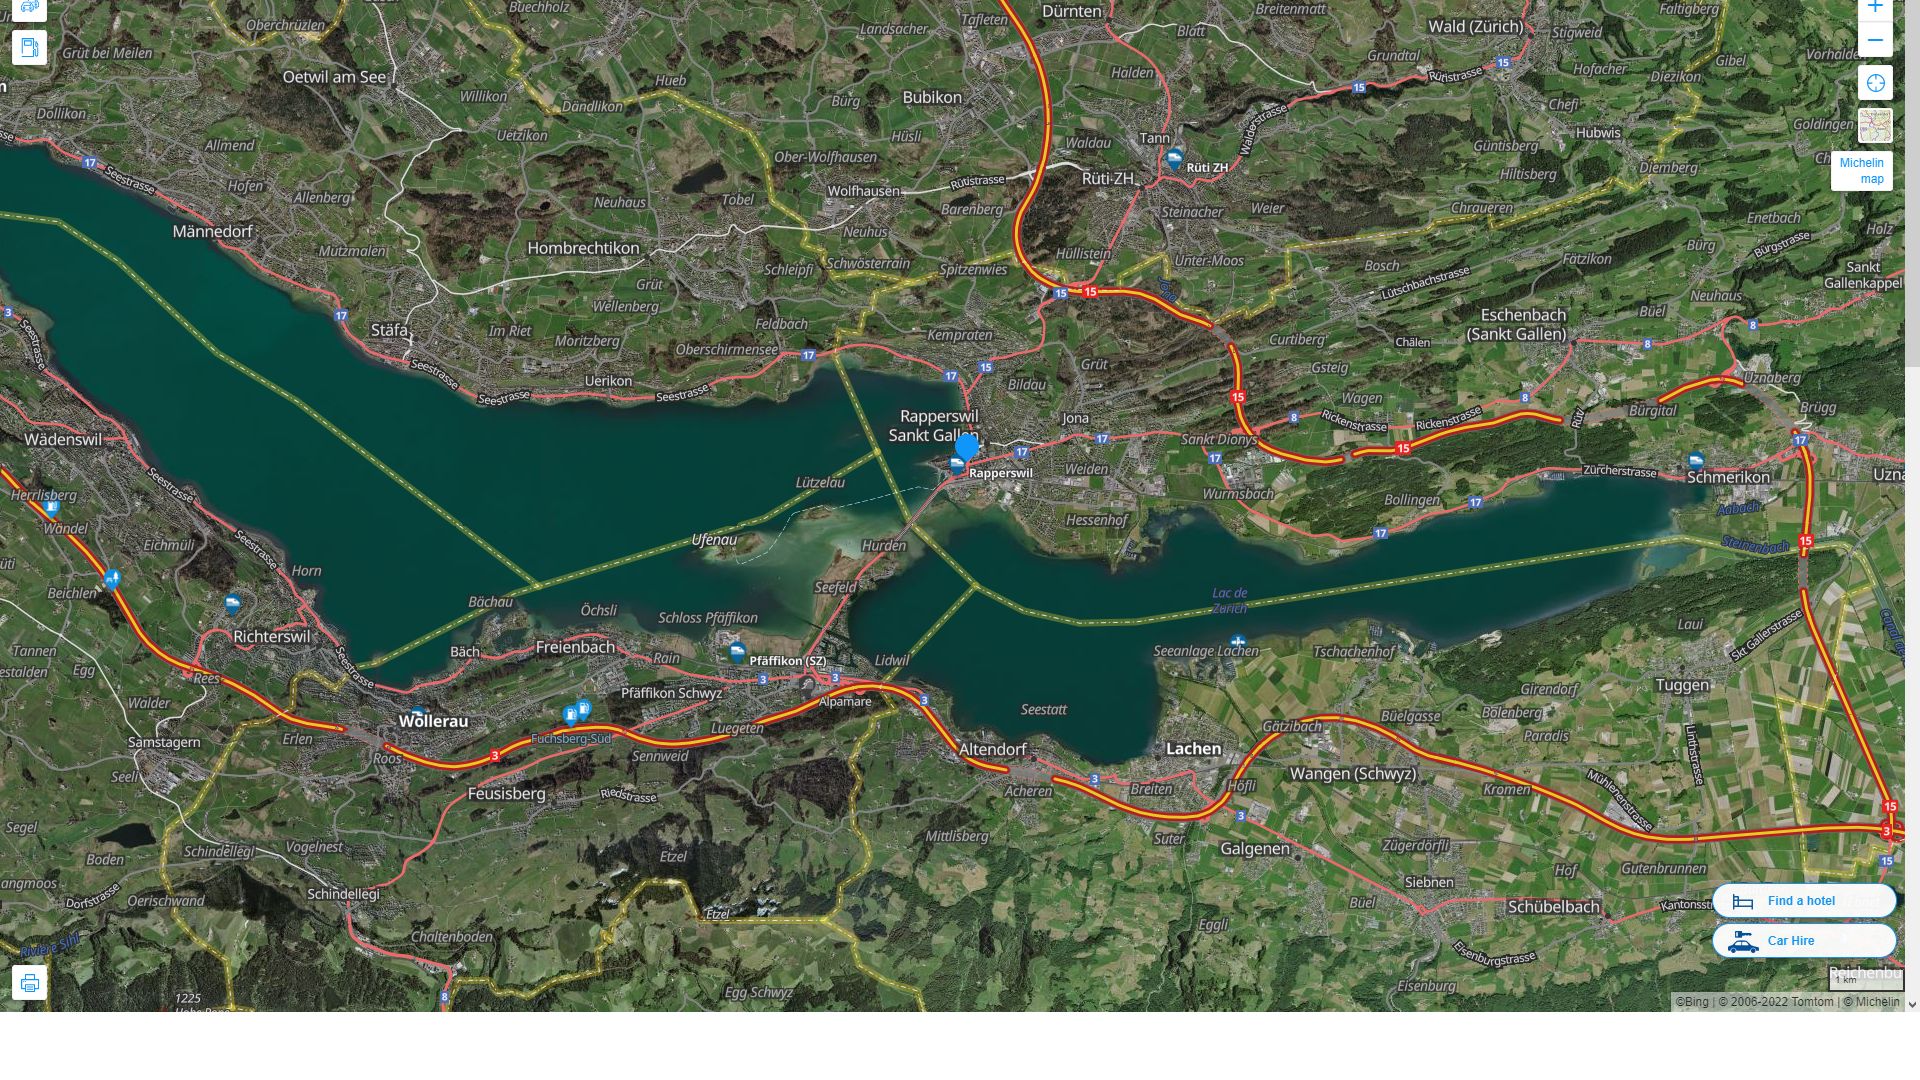 Rapperswil Jona Highway and Road Map with Satellite View